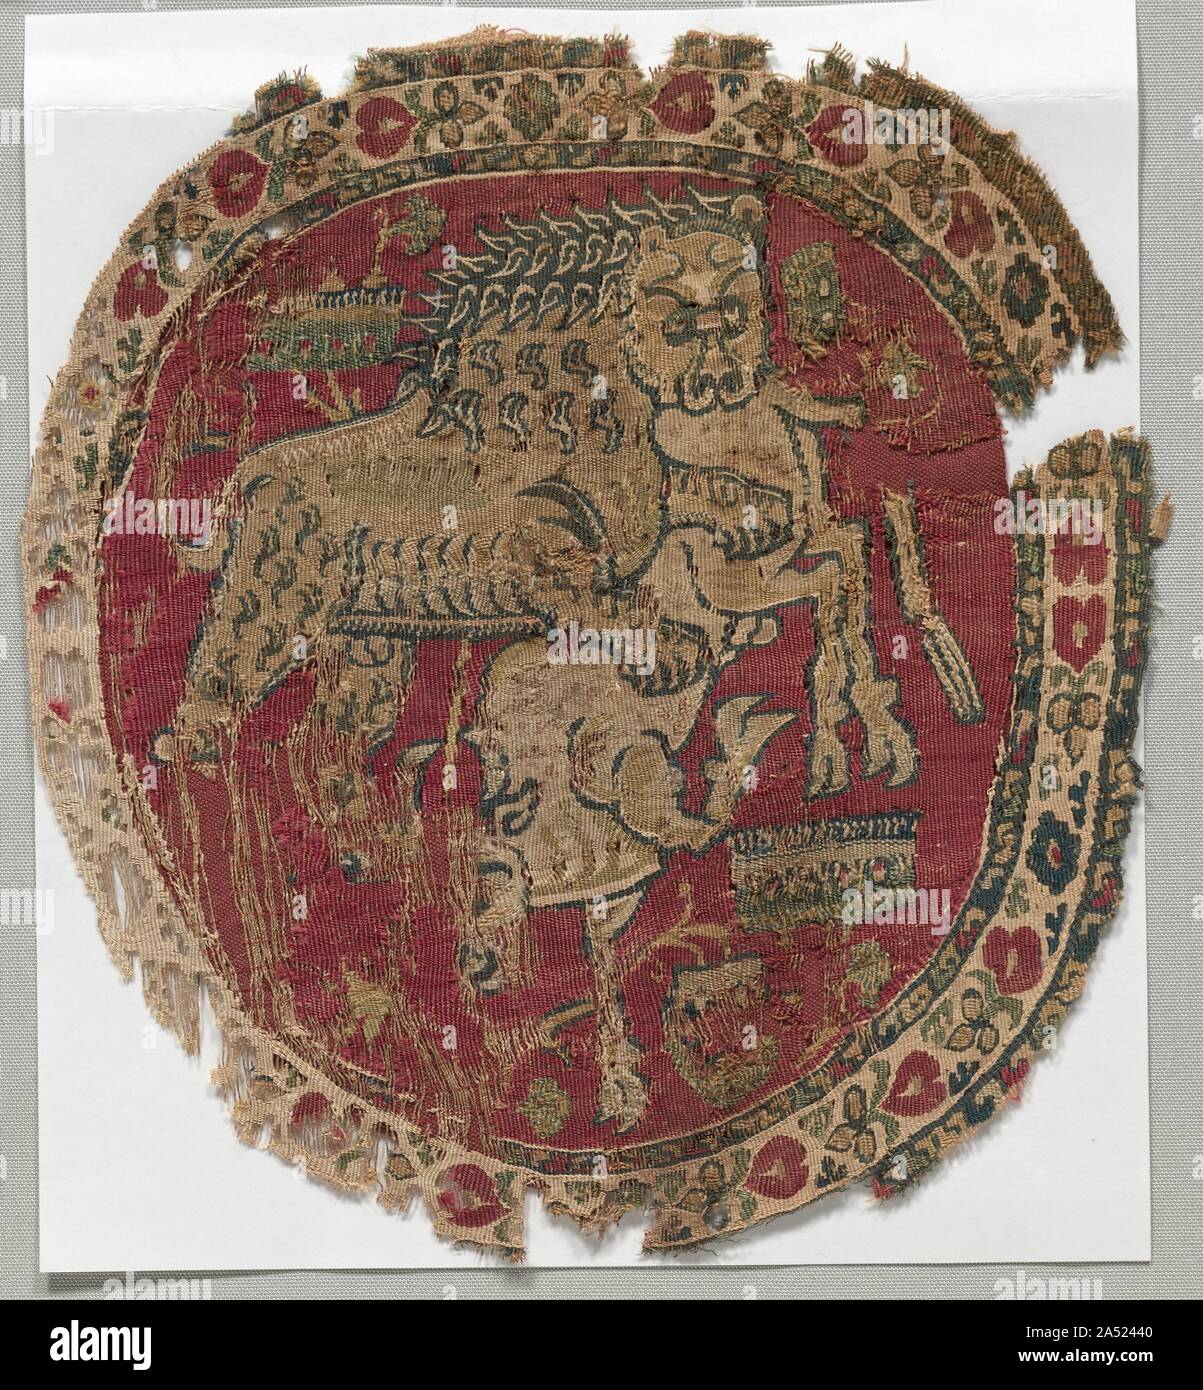 Segmentum from a Tunic, 750 - 799. A fierce lion with a pronounced mane is shown taking down a large bull on a prestigious red ground with stylized trees and plants. Both animals appear to be lunging toward us, the viewer. The border displays a formal wreath of rosettes. This roundel and two additional matching examples suggest that they originally decorated the front and back of a tunic. The scene is presumably an abbreviated reference to the royal hunt, one of the pleasures of the court that served as propaganda to legitimize the sovereignty of rulers by confirming their ability to control n Stock Photo